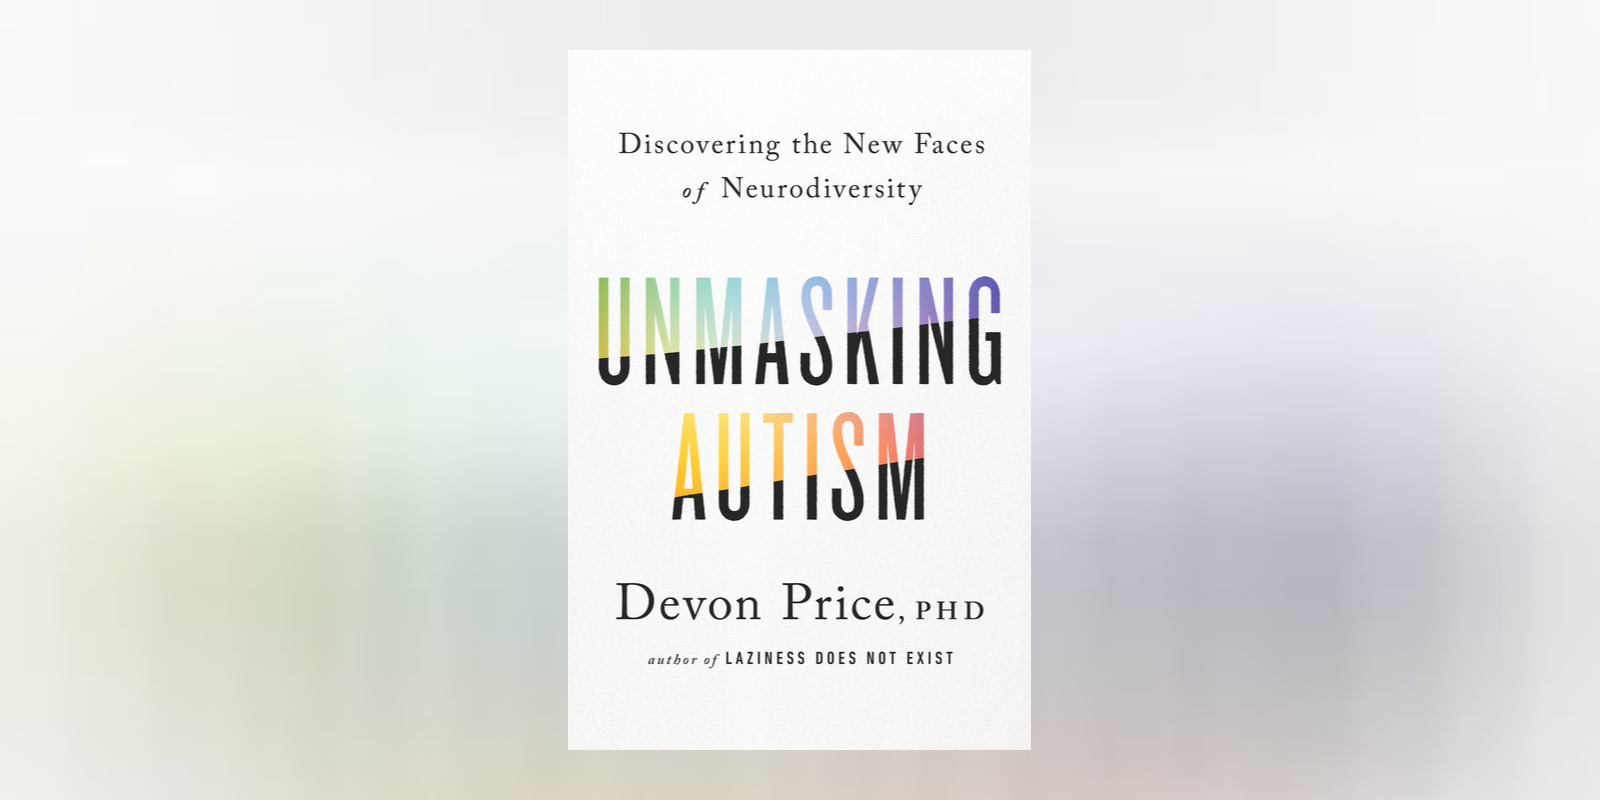 Psychologist Devon Price on Autism and the New Faces of Neurodiversity